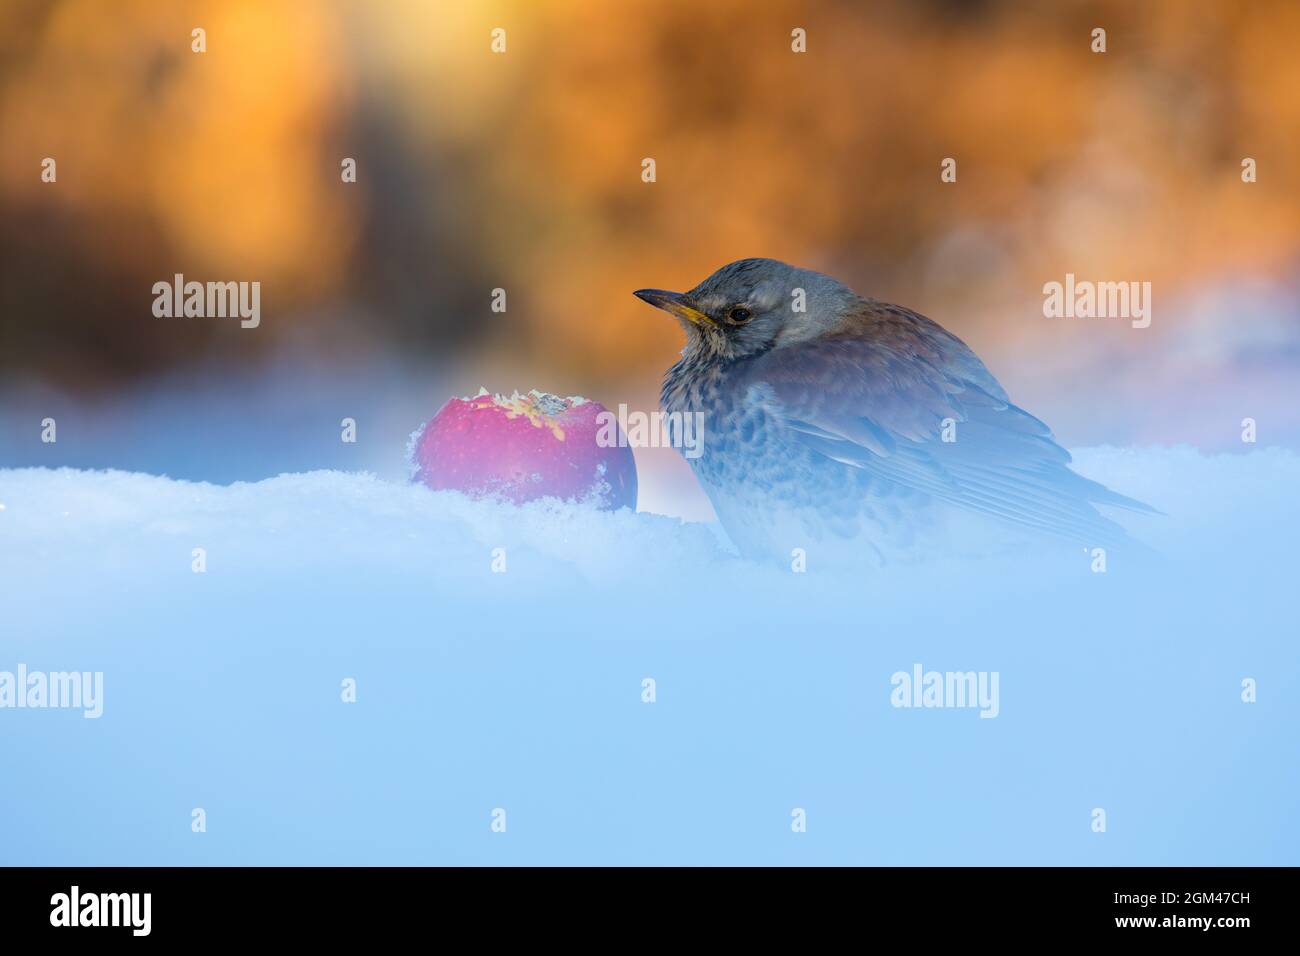 Fieldfare (Turdus pilaris) in winter feeding on an apple. It is a migrating species in some parts of Europe. Photographed in Denmark Stock Photo